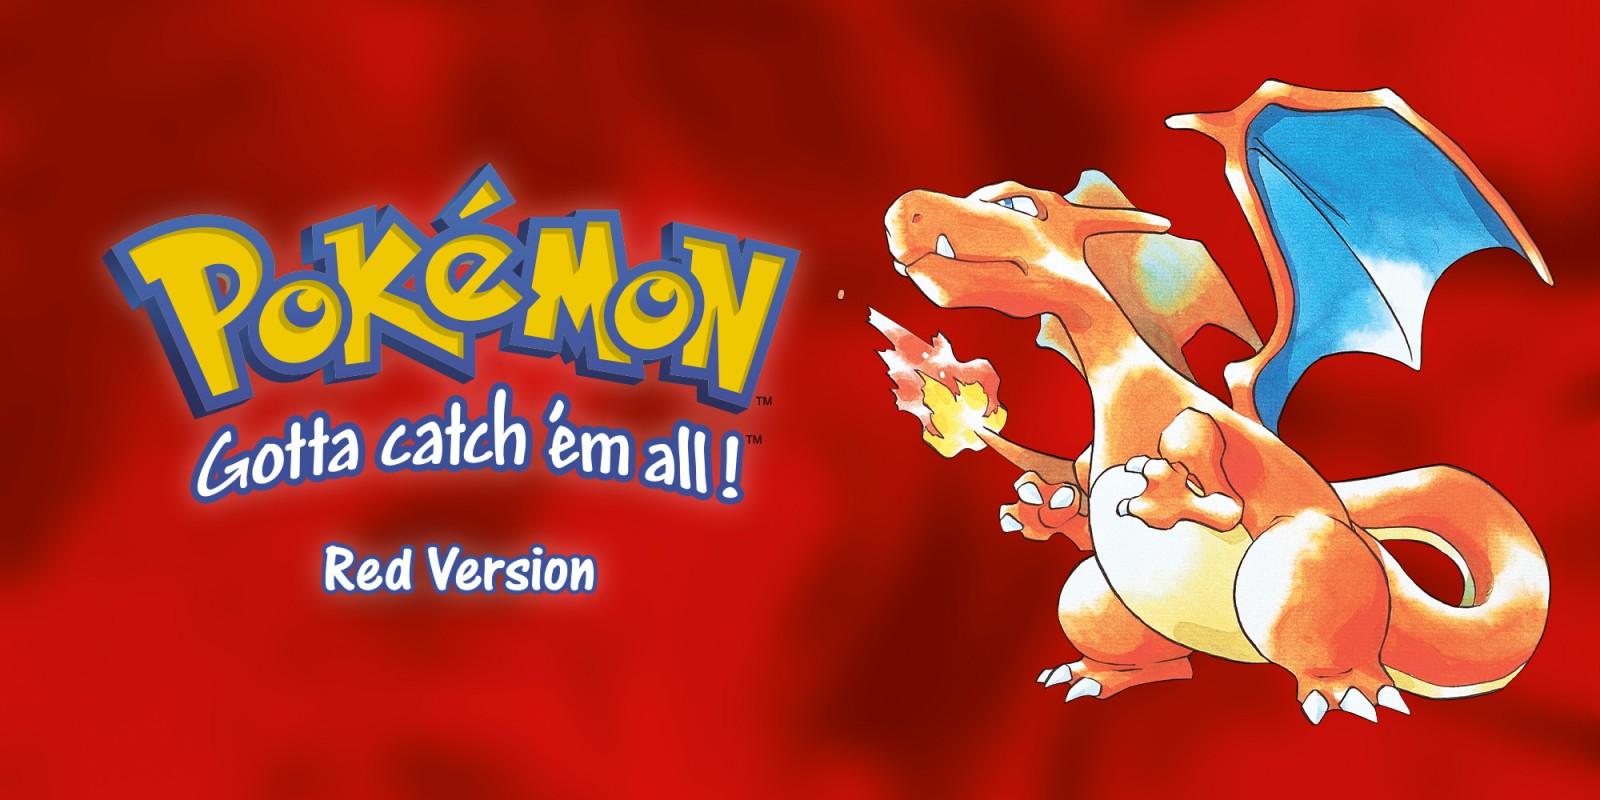 v4 Teaser Discussion and Theories - Discuss the Game - Pokémon